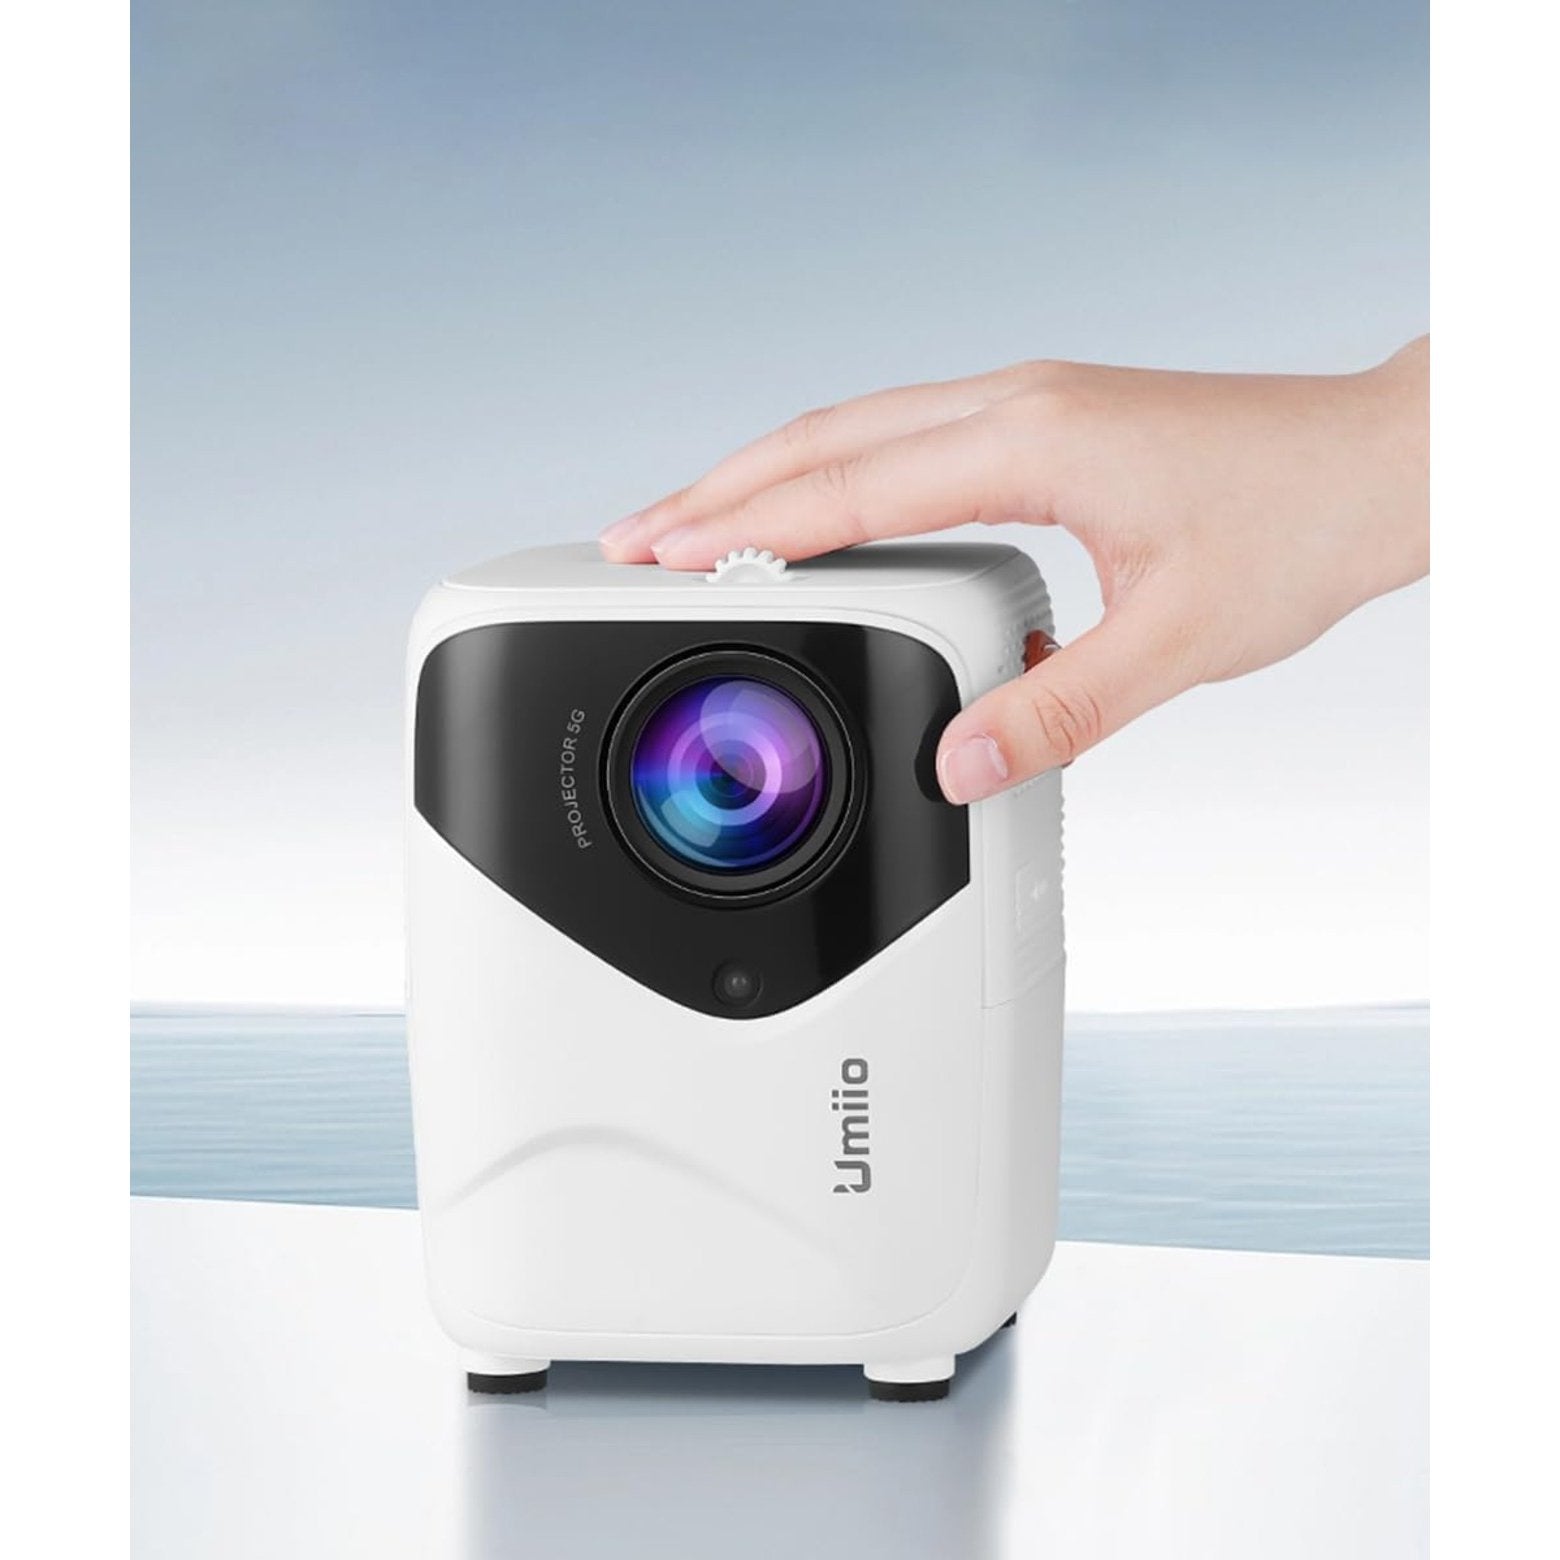 Umiio Q2 Wireless Projector / Small & Portable / 1080P Resolution / Blue Light Protection